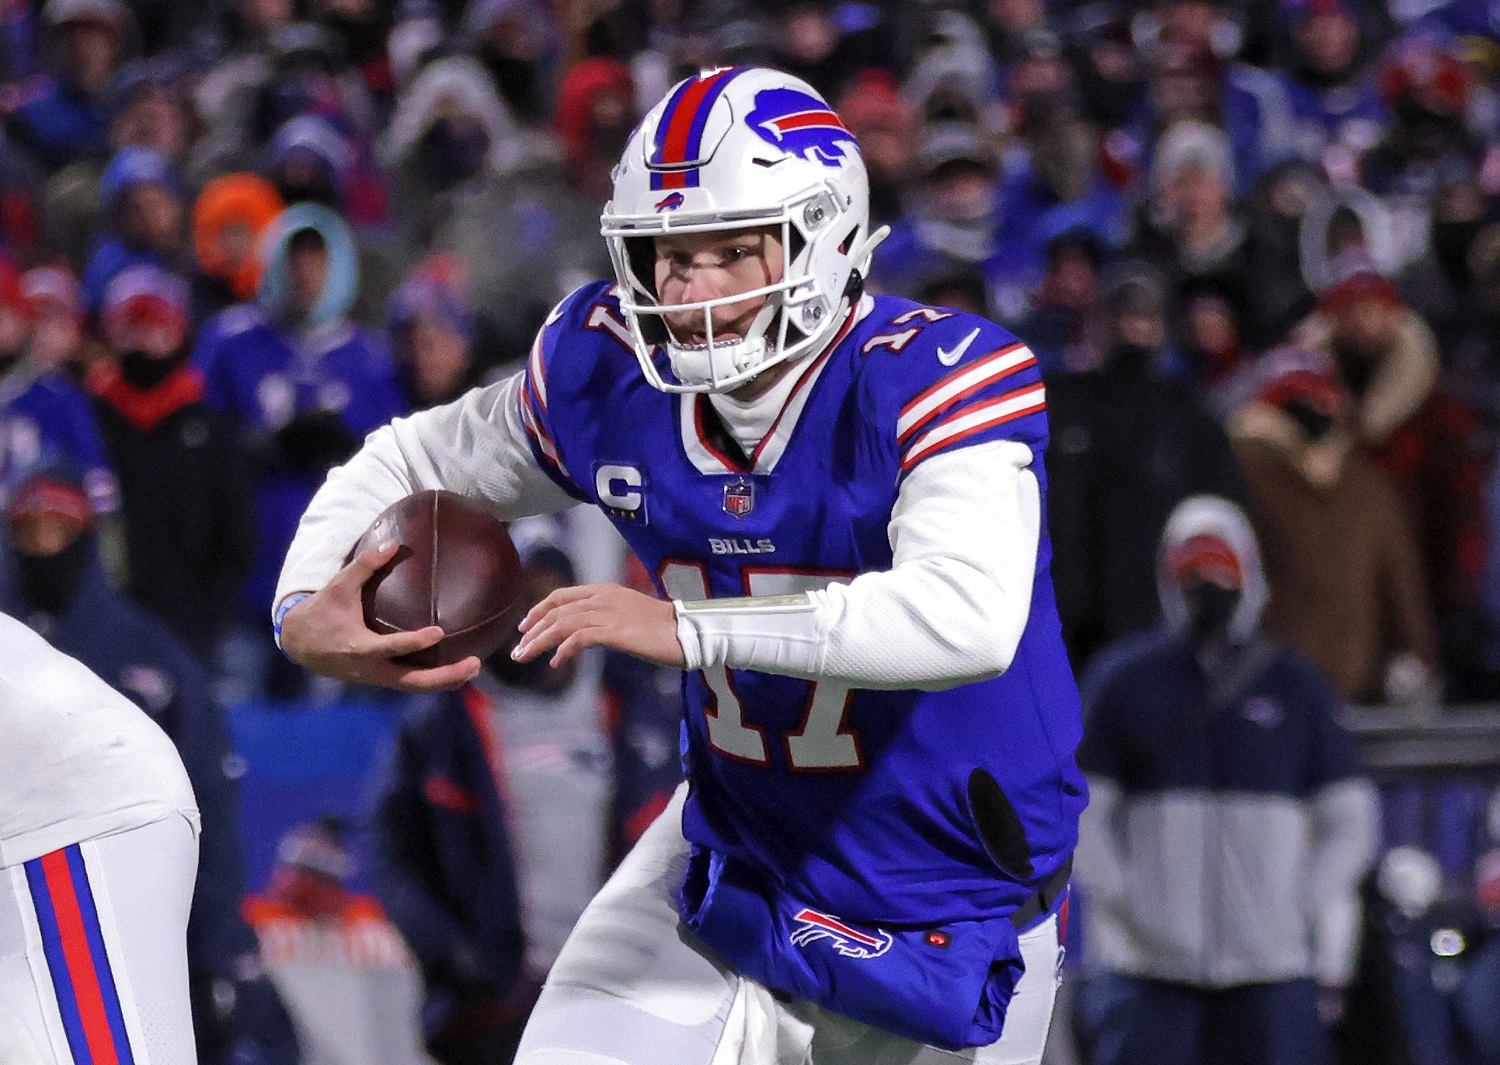 Josh Allen of the Buffalo Bills runs for a first down against the New England Patriots at Highmark Stadium on Jan. 15, 2022 | Timothy T Ludwig/Getty Images